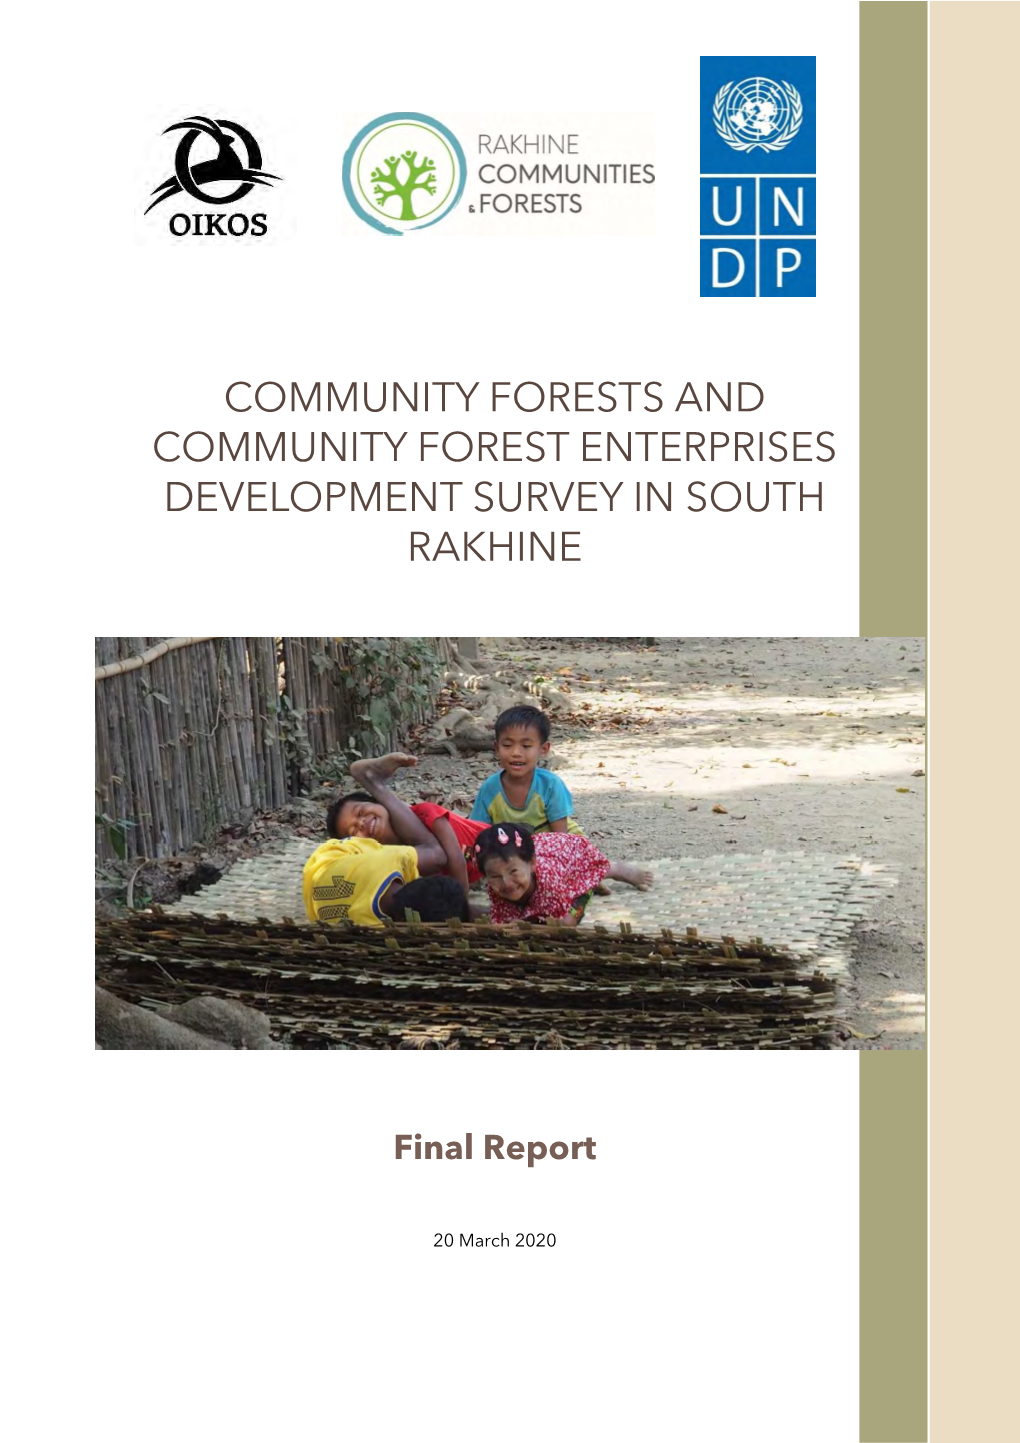 Community Forests and Community Forest Enterprises Development Survey in South